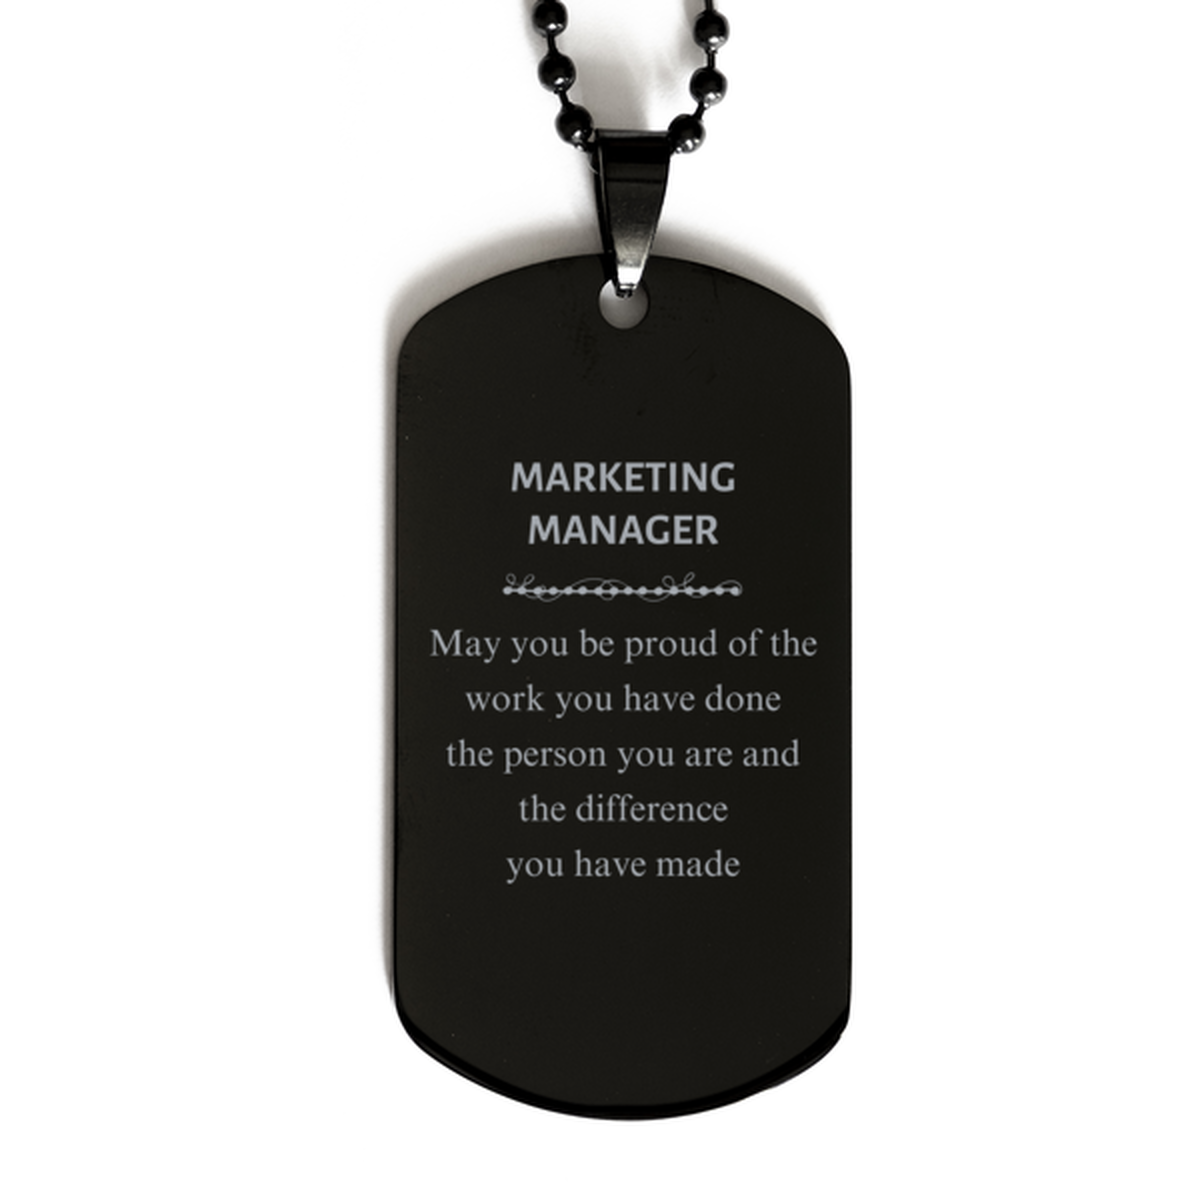 Marketing Manager May you be proud of the work you have done, Retirement Marketing Manager Black Dog Tag for Colleague Appreciation Gifts Amazing for Marketing Manager